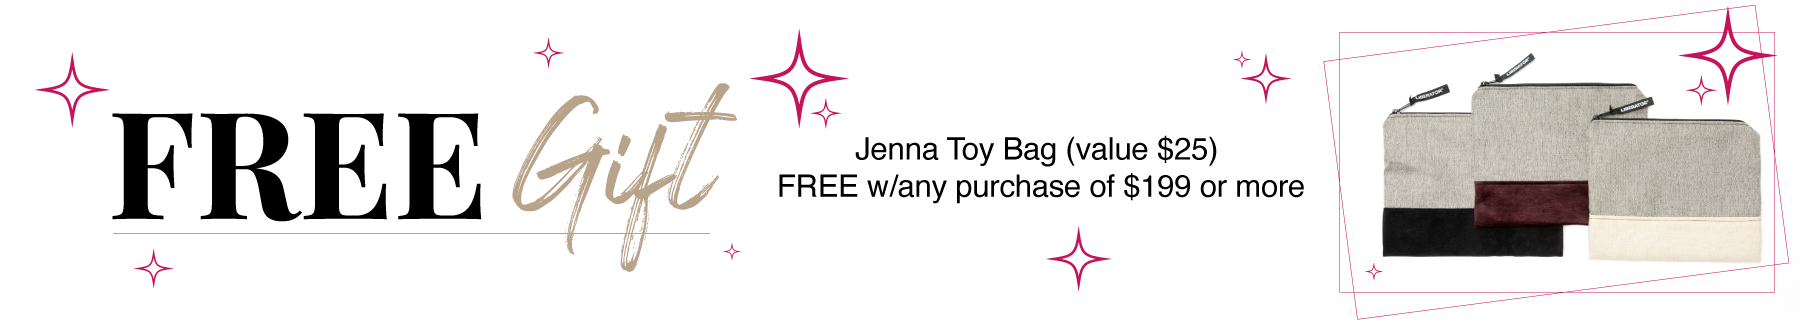 Free Toy Bag with Purchase!